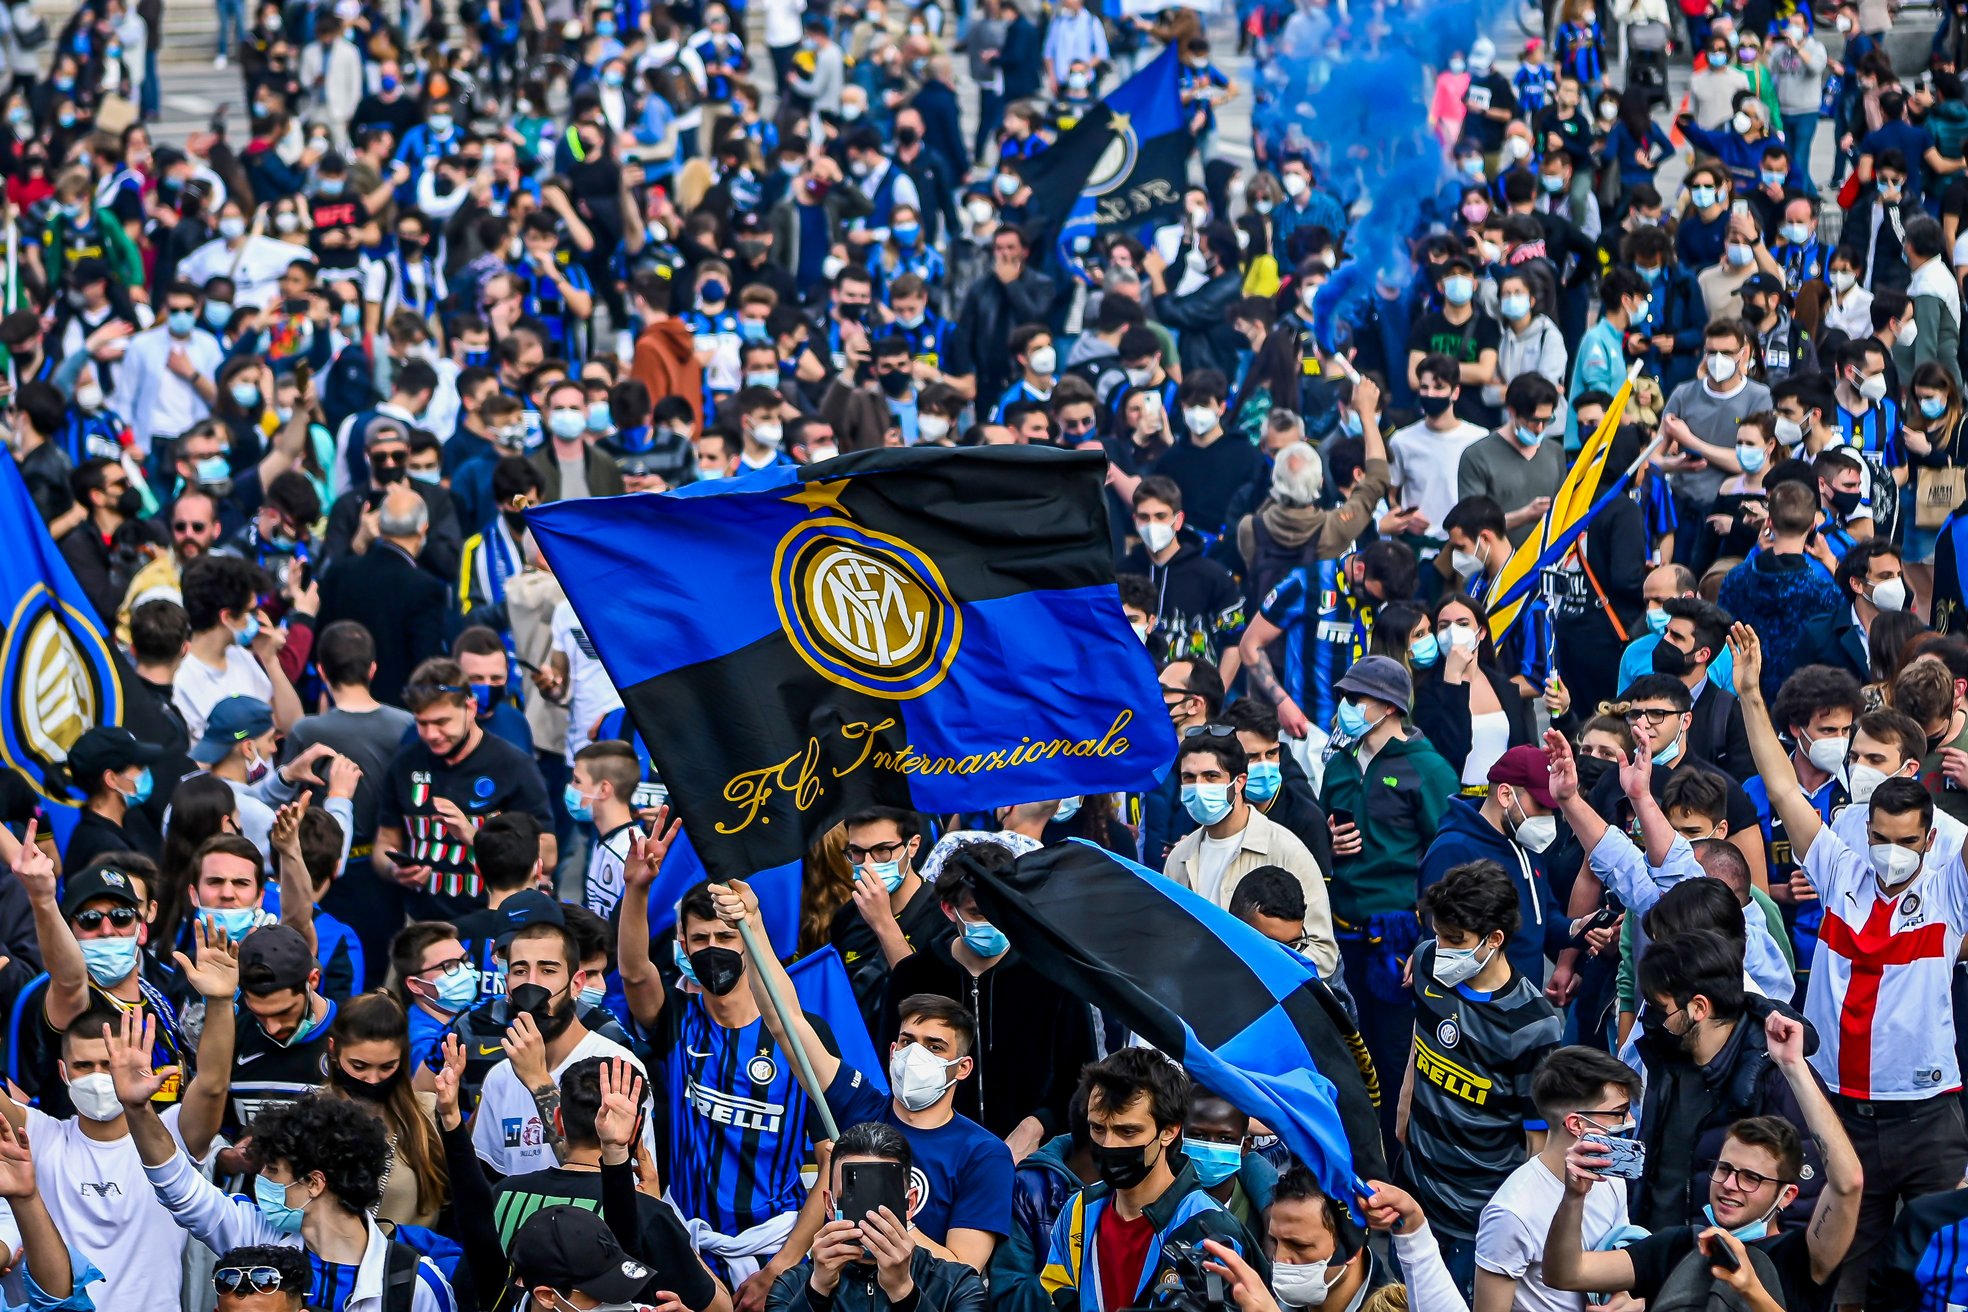 Inter fans celebrate the club winning its first Scudetto in 11 years | Serie A